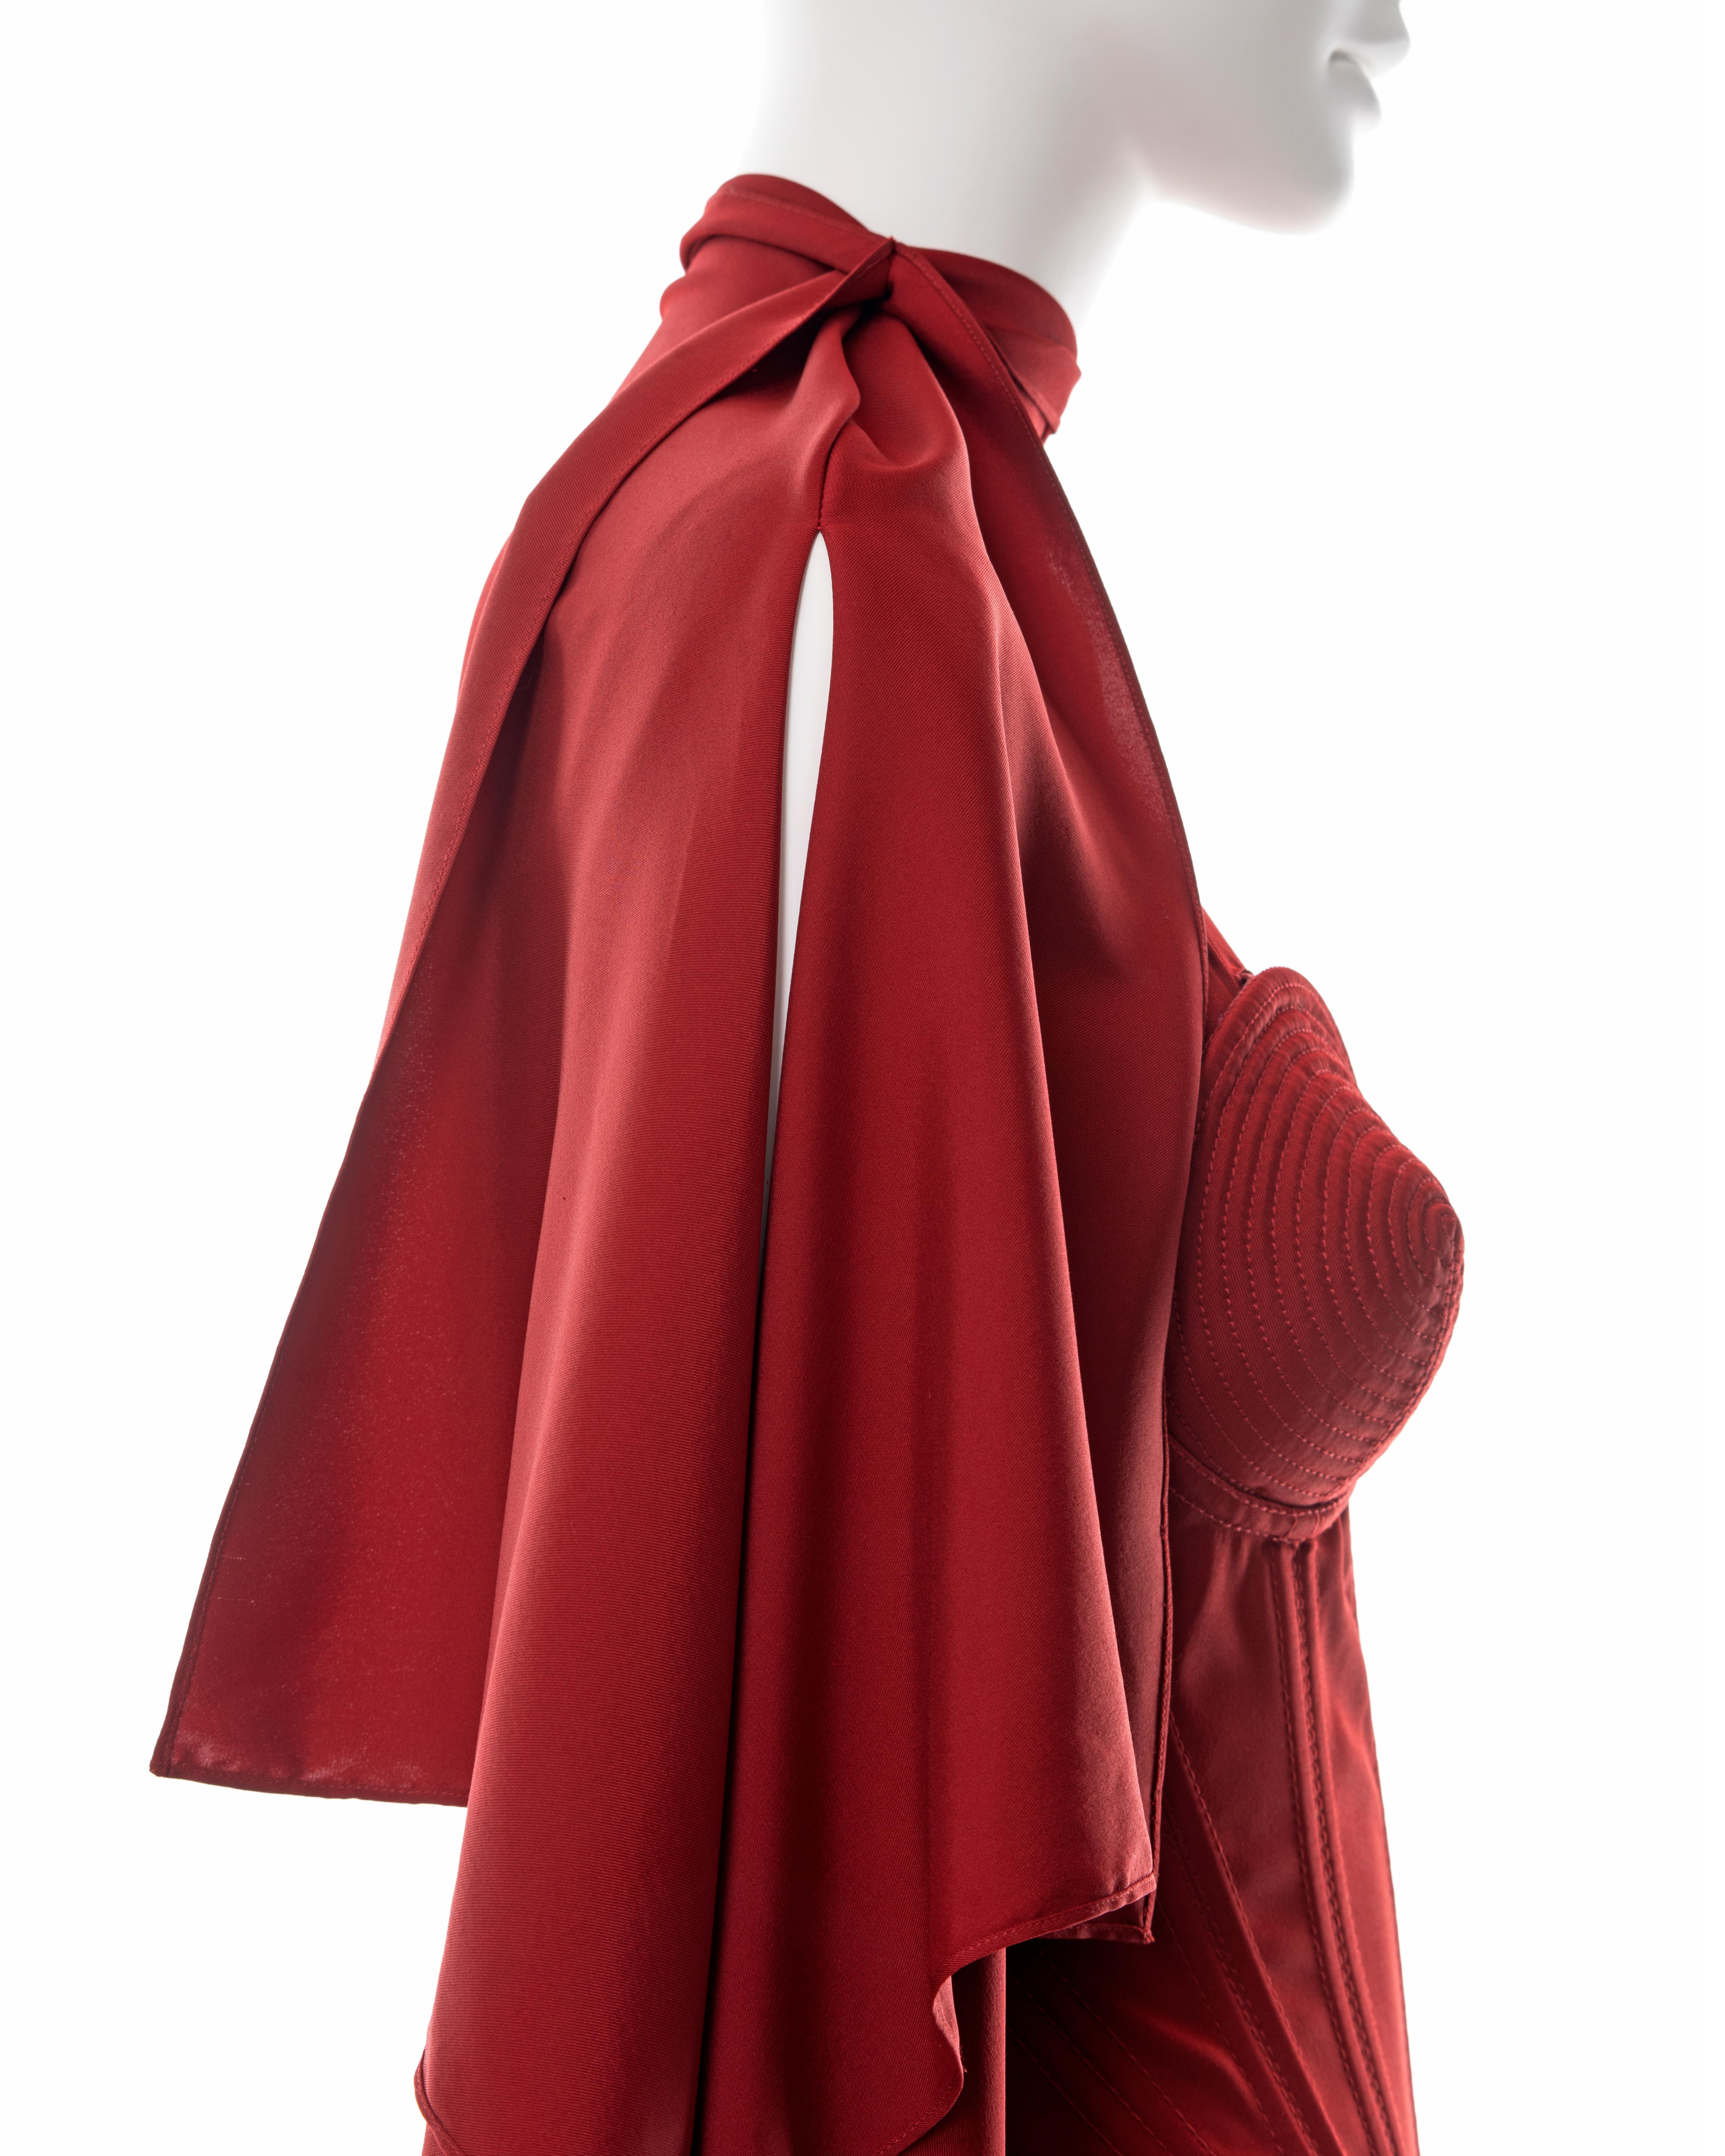 Jean Paul Gaultier red silk dress with built-in cone bra and corset, fw 2010 4